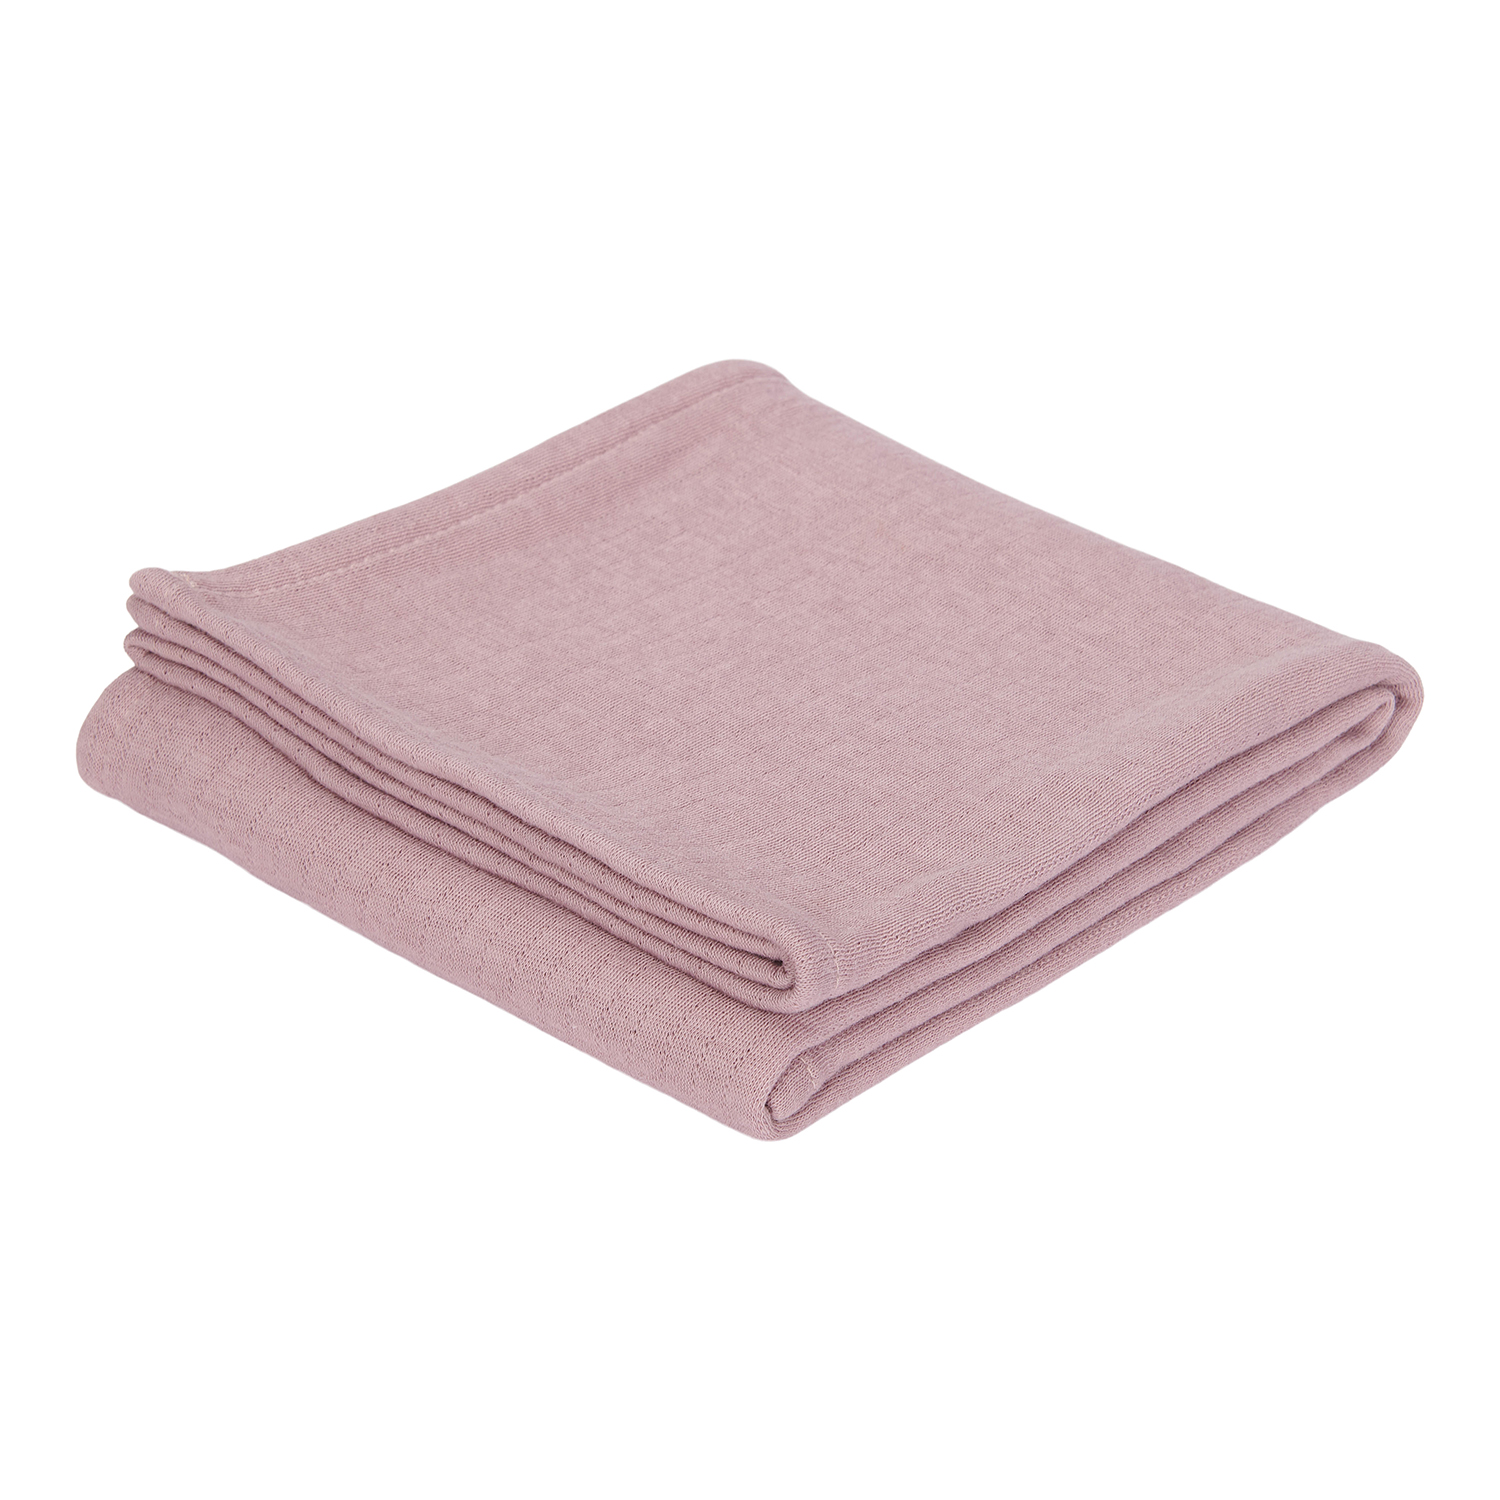 Musselin Swaddle Tuch / Pucktuch Pure mauve (120x120 cm)